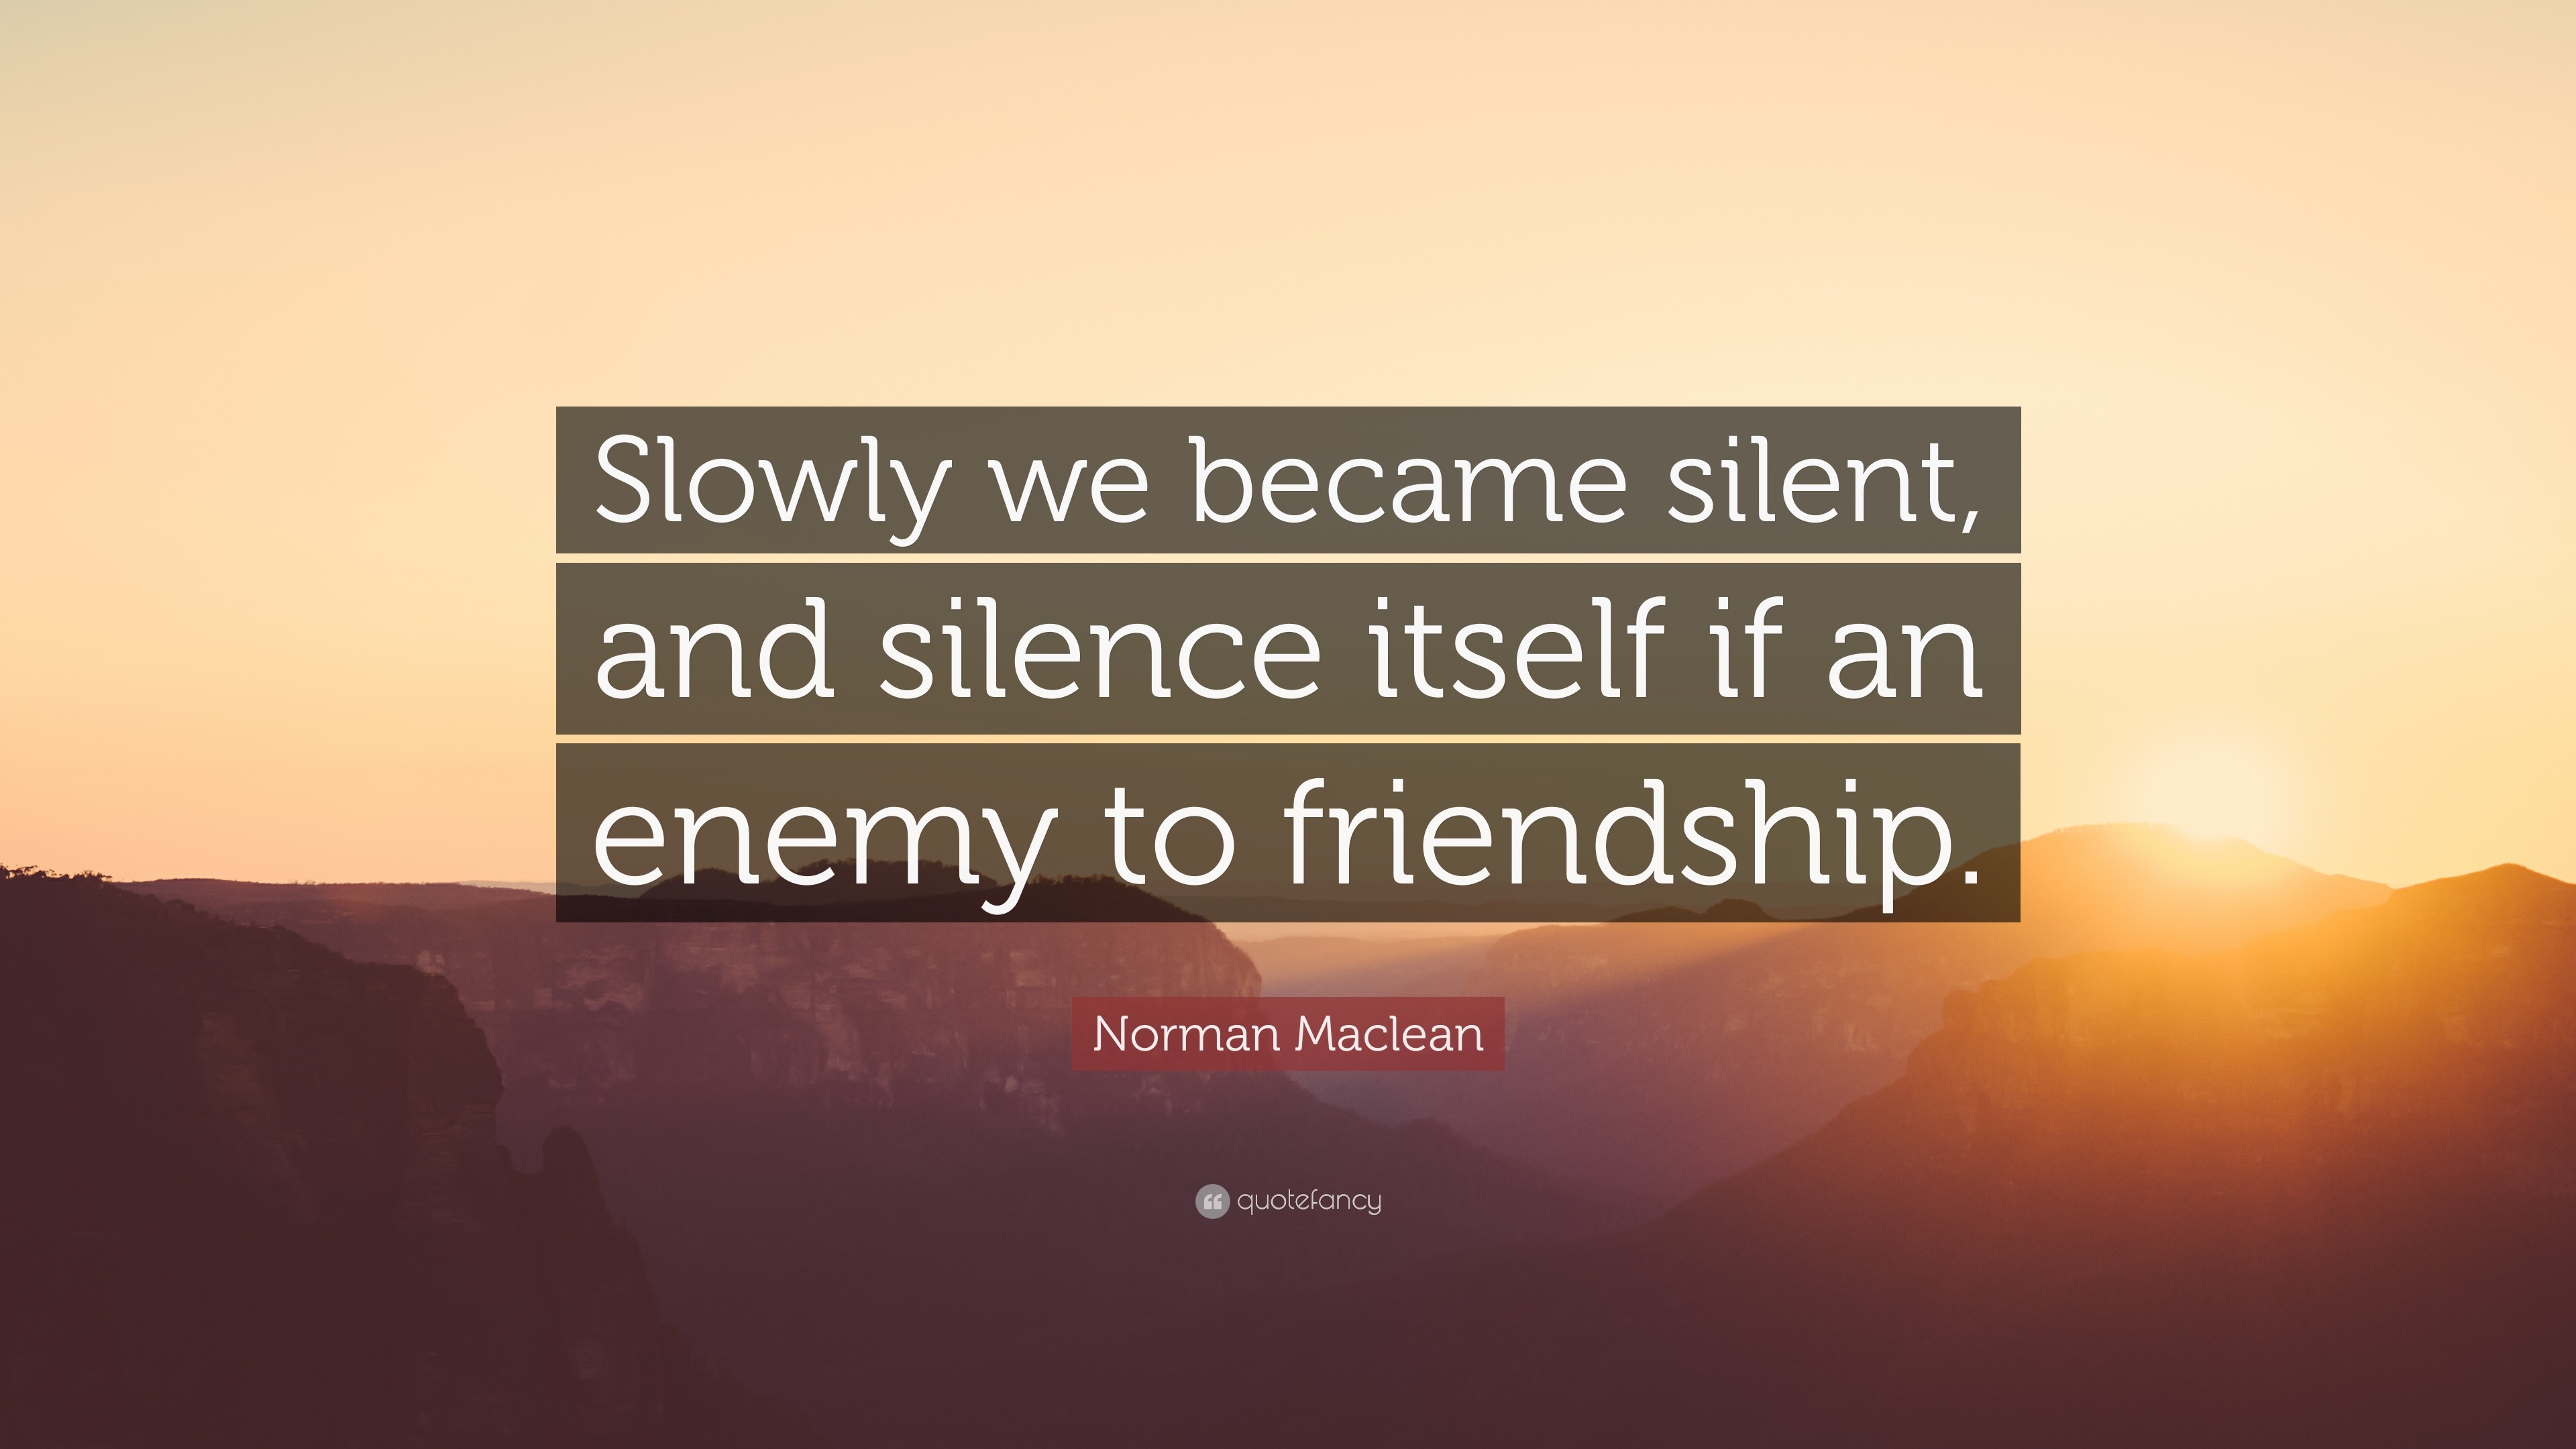 Norman Maclean Quote: "Slowly we became silent, and ...